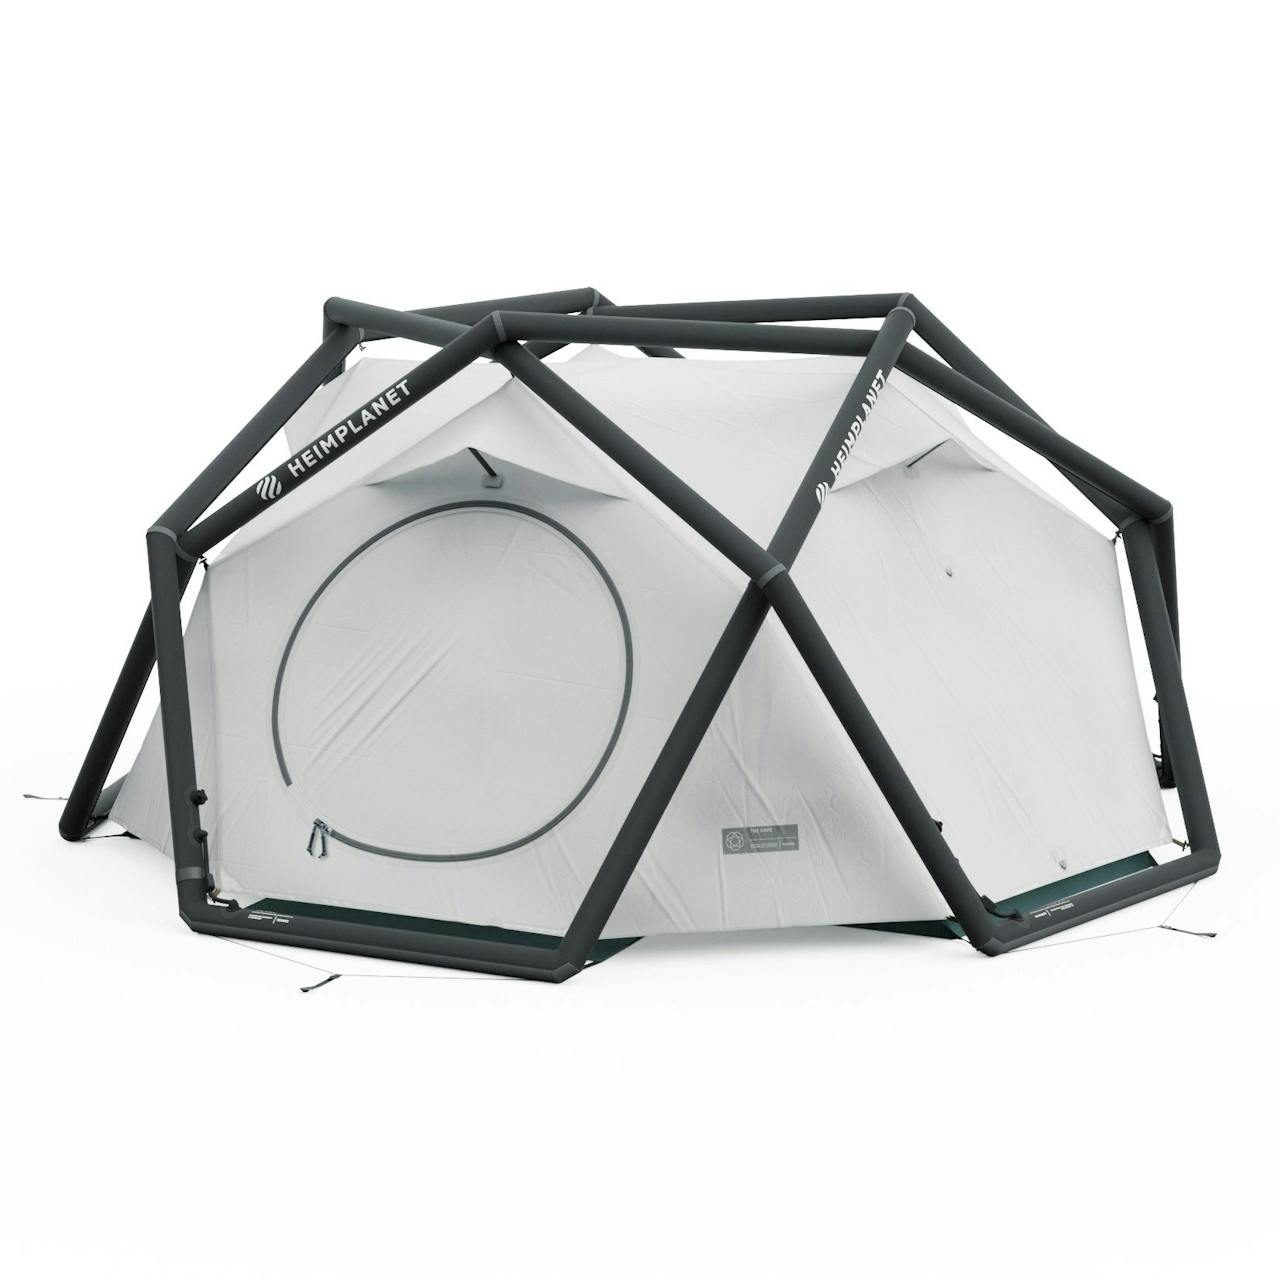 https://huckberry.imgix.net/spree/products/710942/original/82863_Heimplanet_Cave_2-3_Person_Inflatable_Tent_Classic_White_01.jpg?auto=format%2C%20compress&crop=top&fit=clip&cs=tinysrgb&w=1280&ixlib=react-9.5.2&h=1280